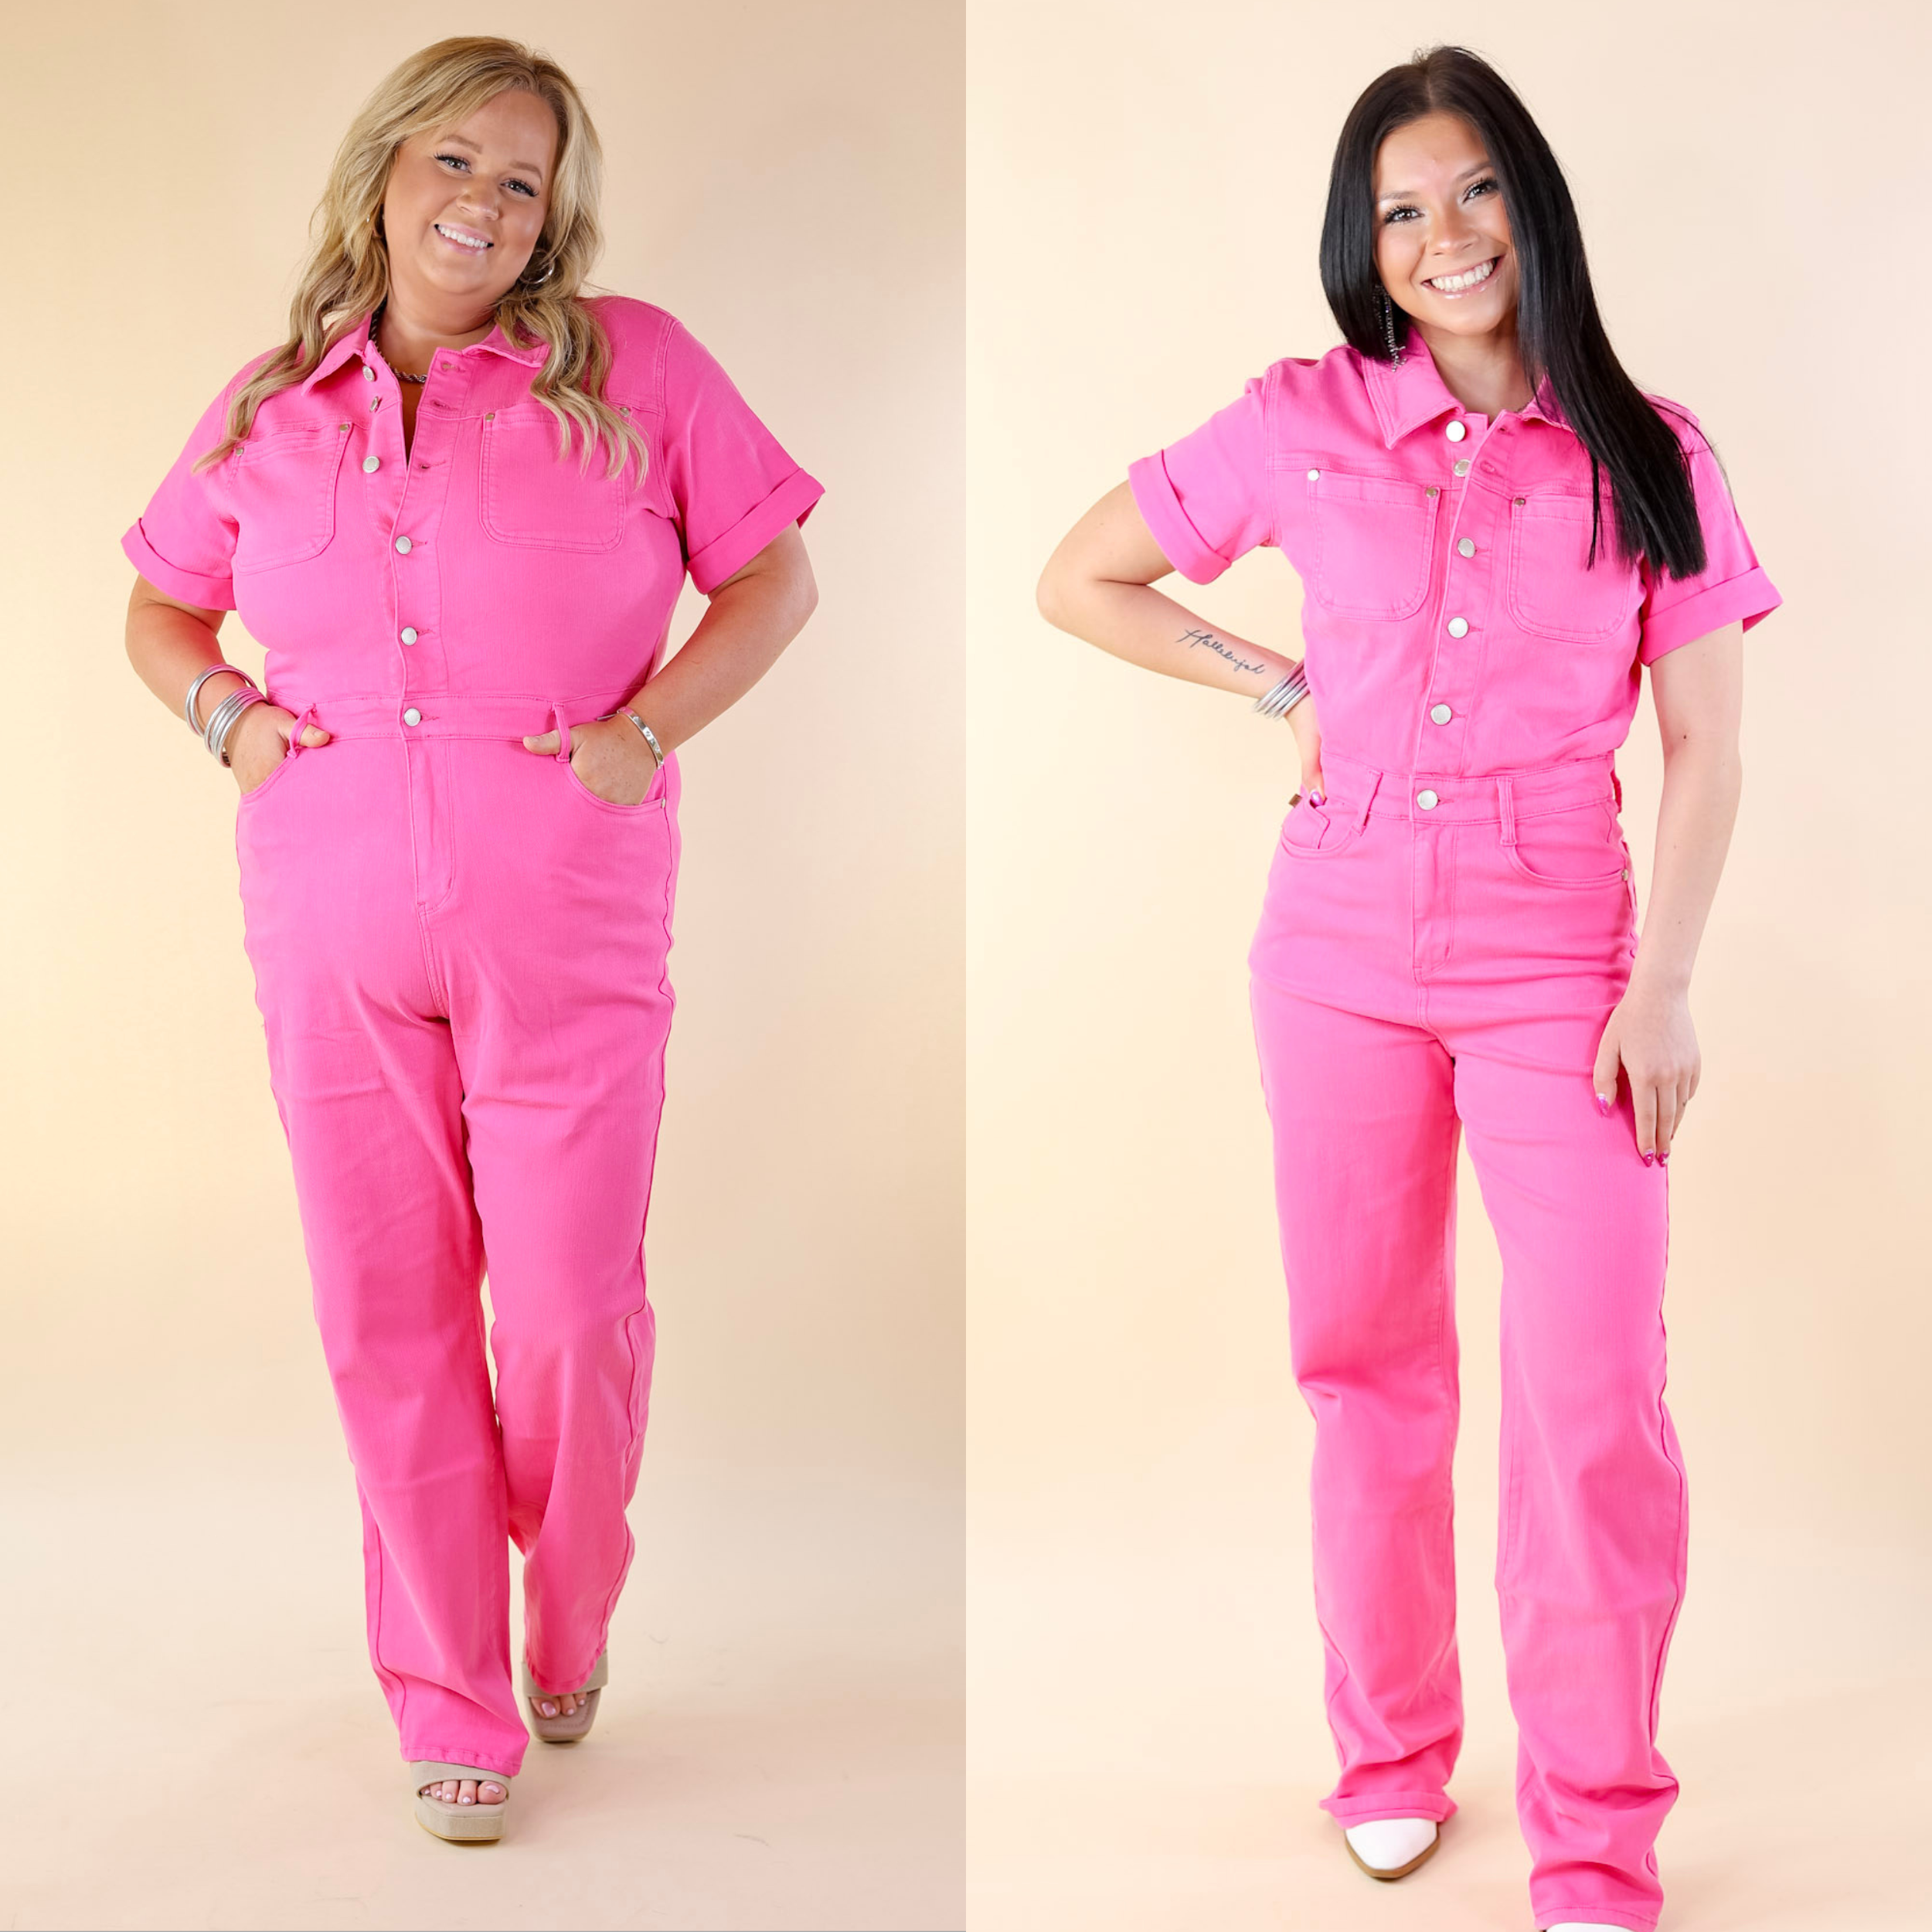 Judy Blue | New To The City Short Sleeve Denim Jumpsuit in Hot Pink - Giddy Up Glamour Boutique